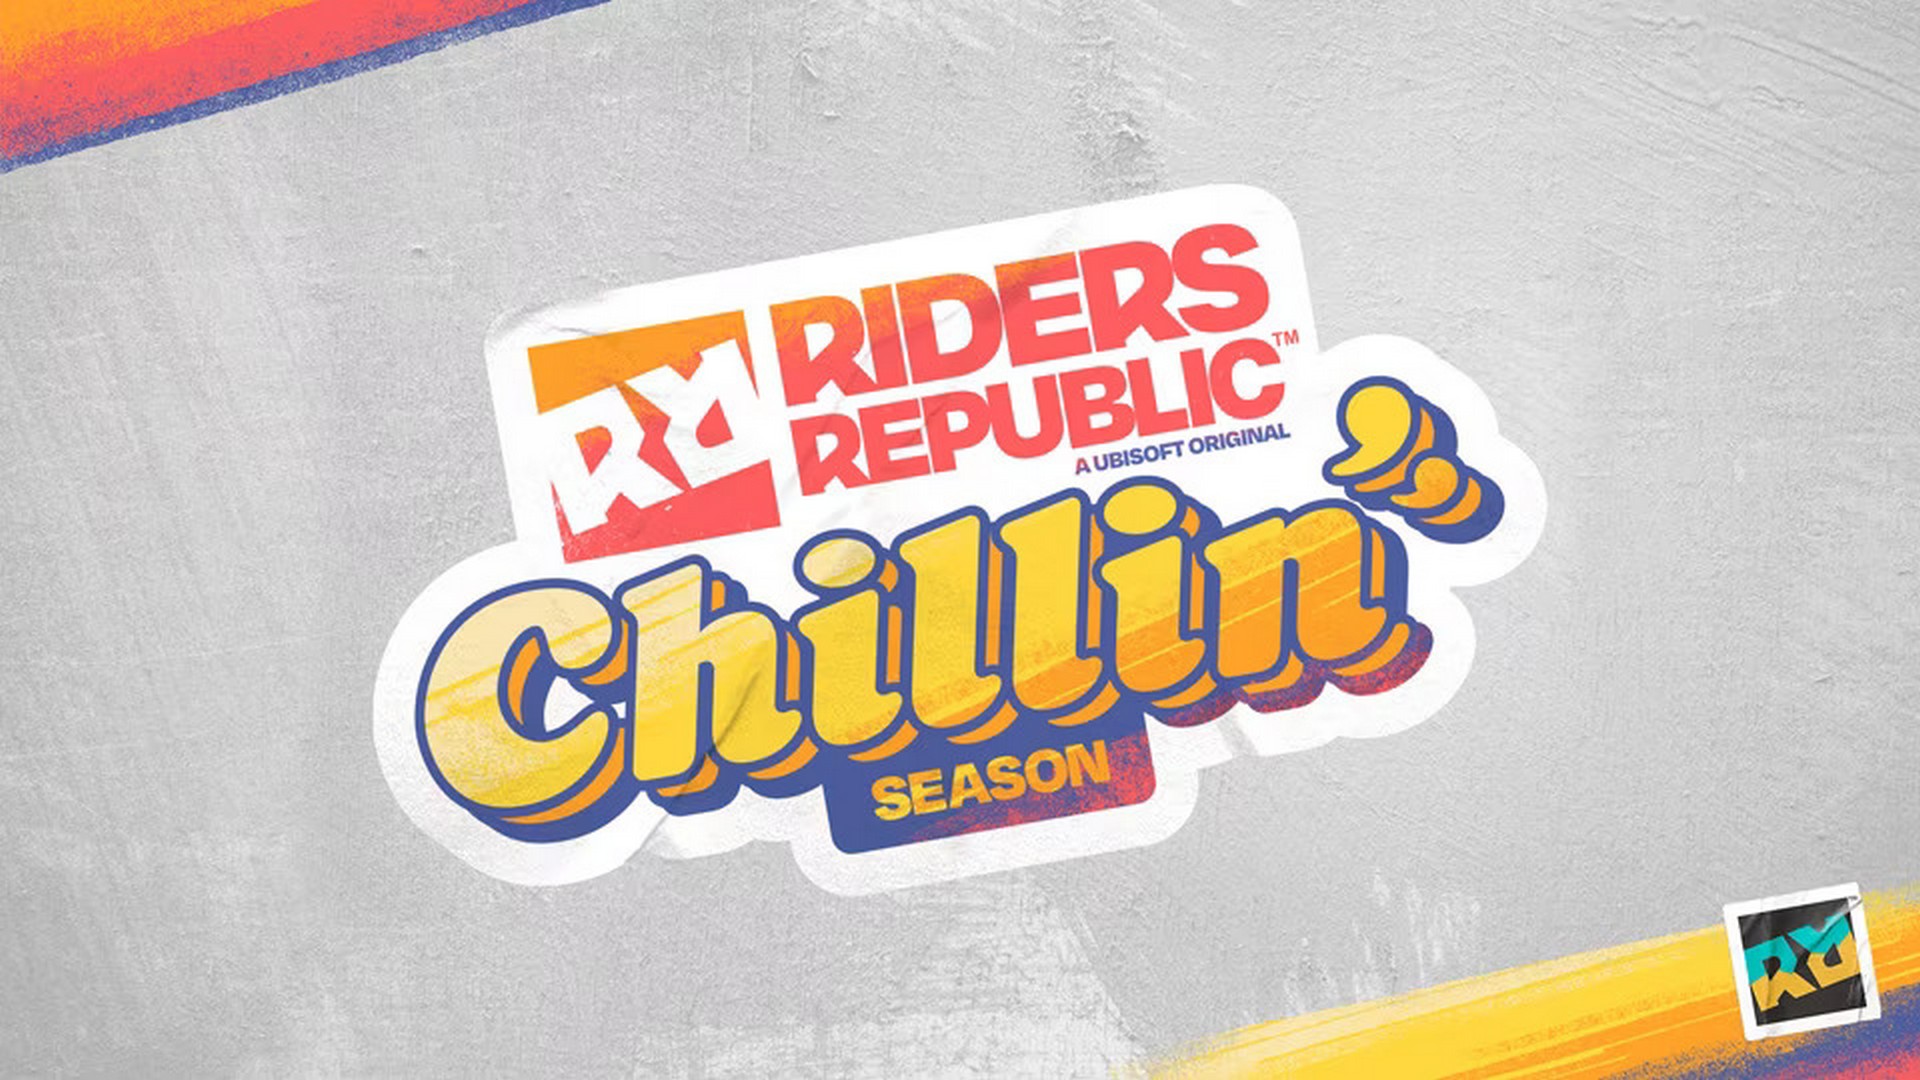 Riders Republic Summer Is Coming For Season 7: Chillin’